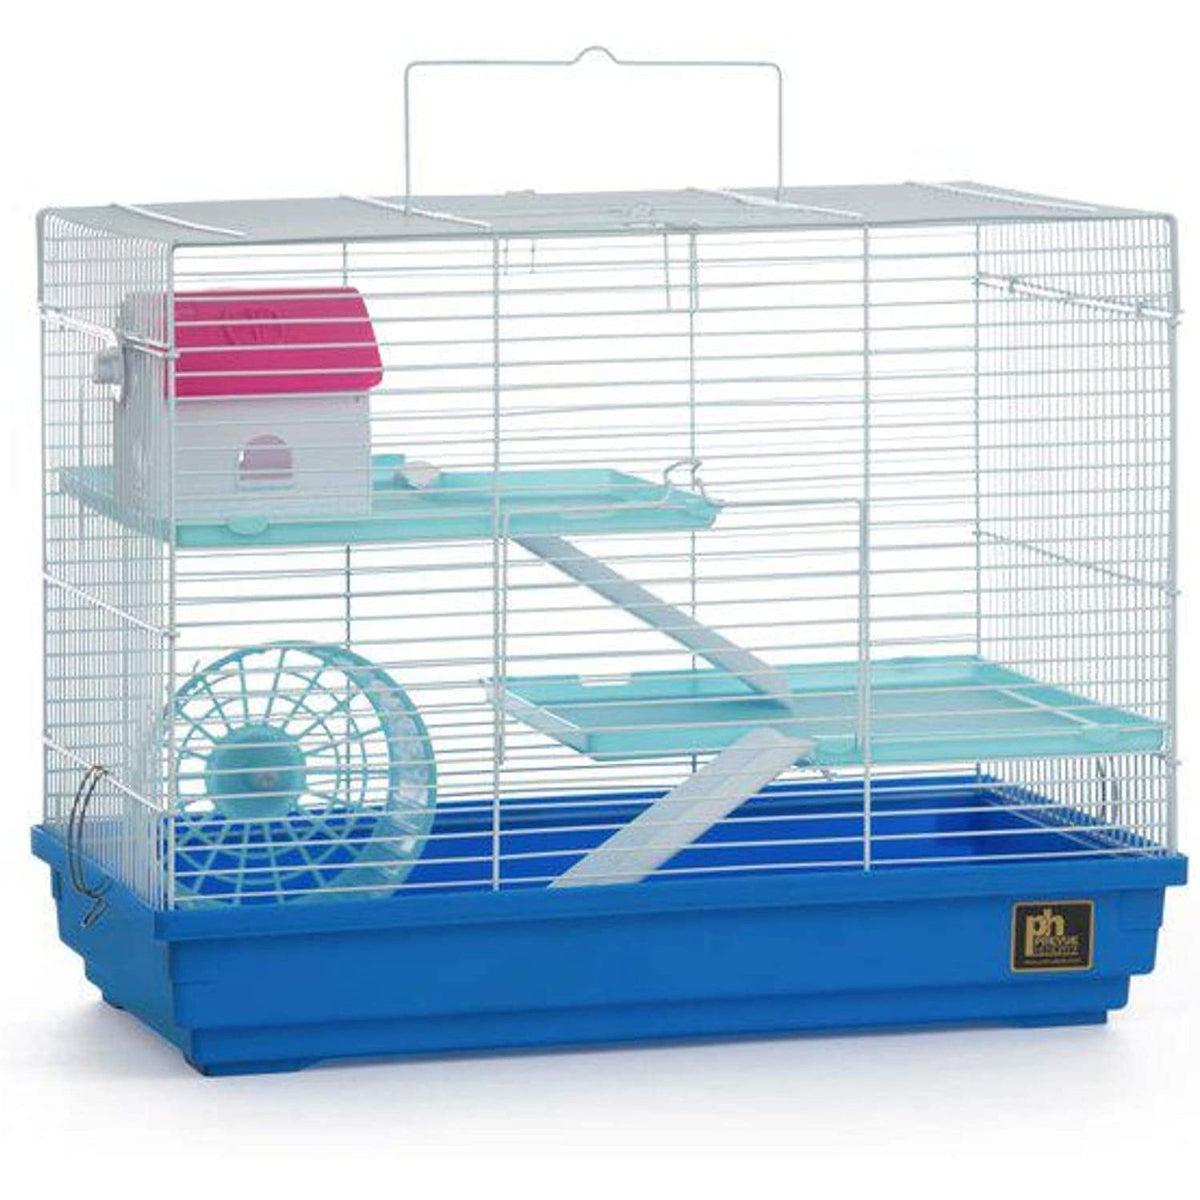 Prevue Pet Products Critter Clubhouse